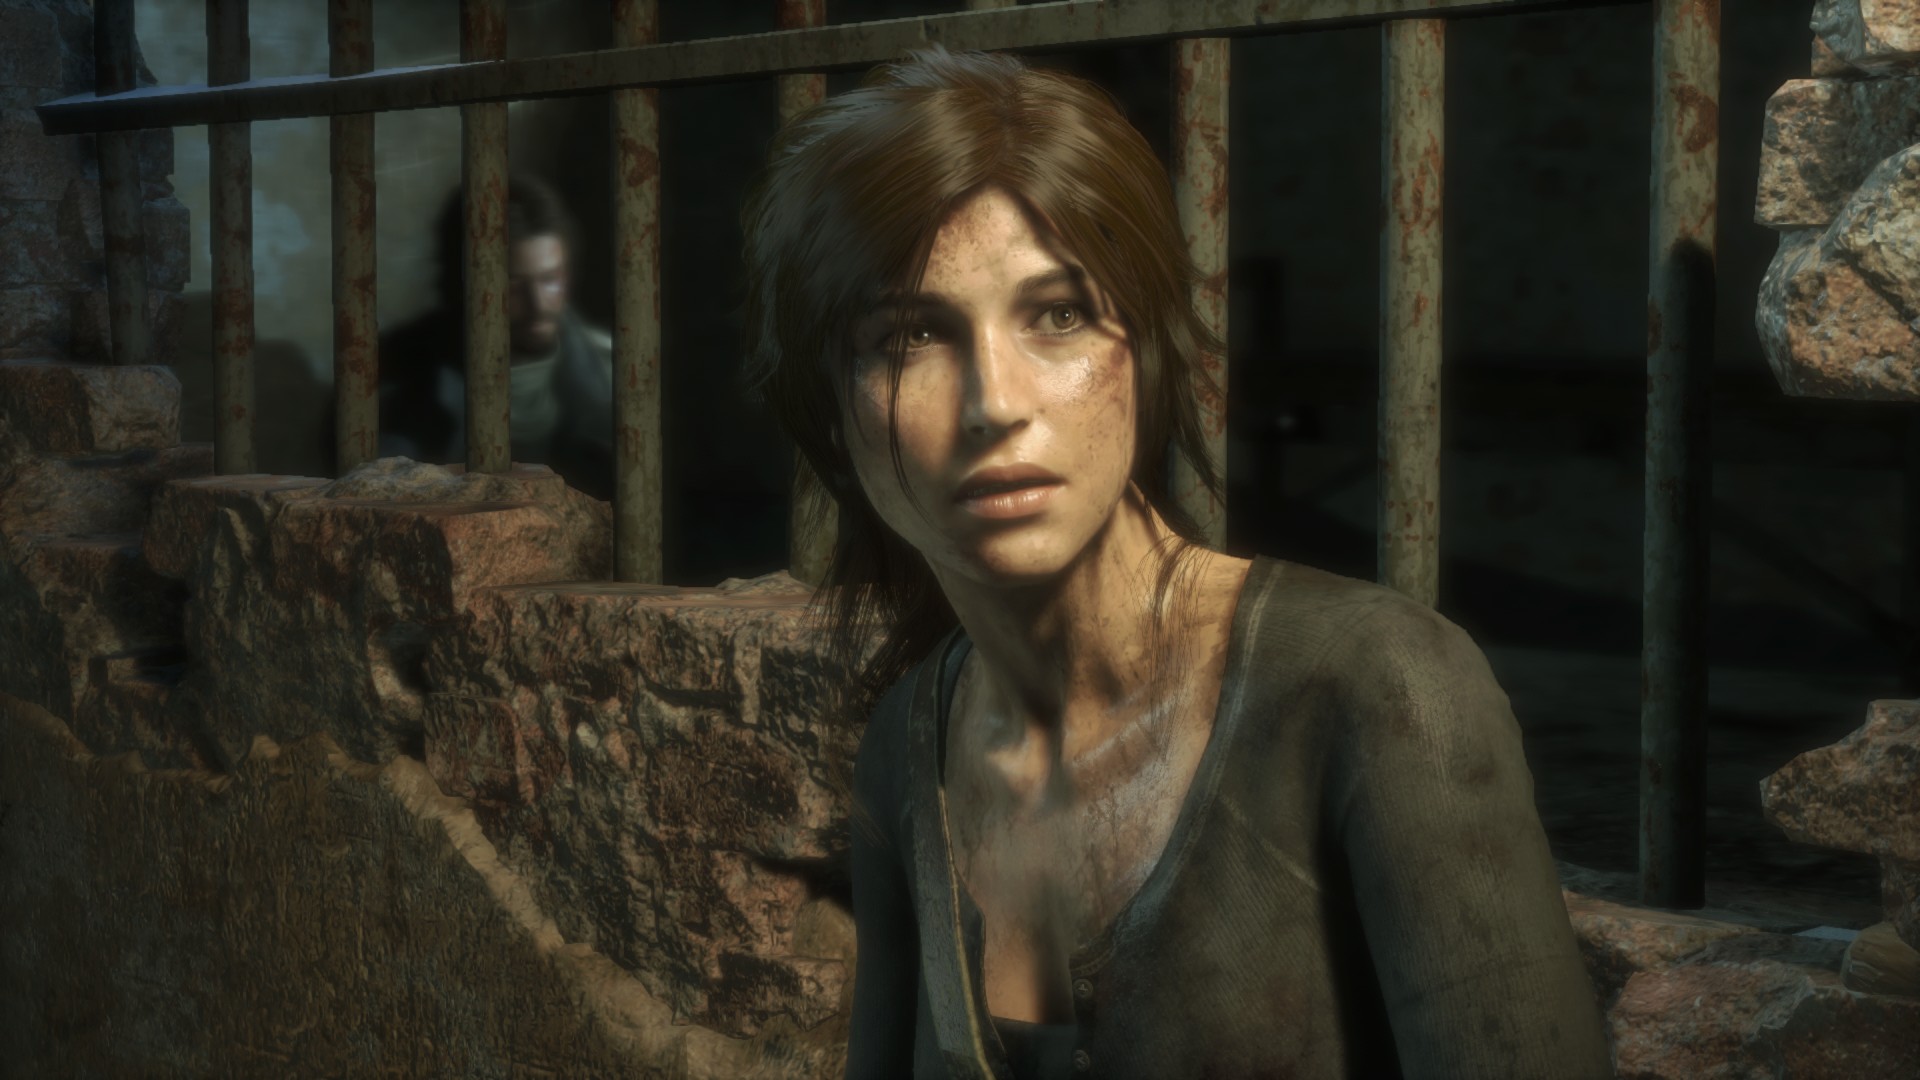 rise of the tomb raider xbox one download